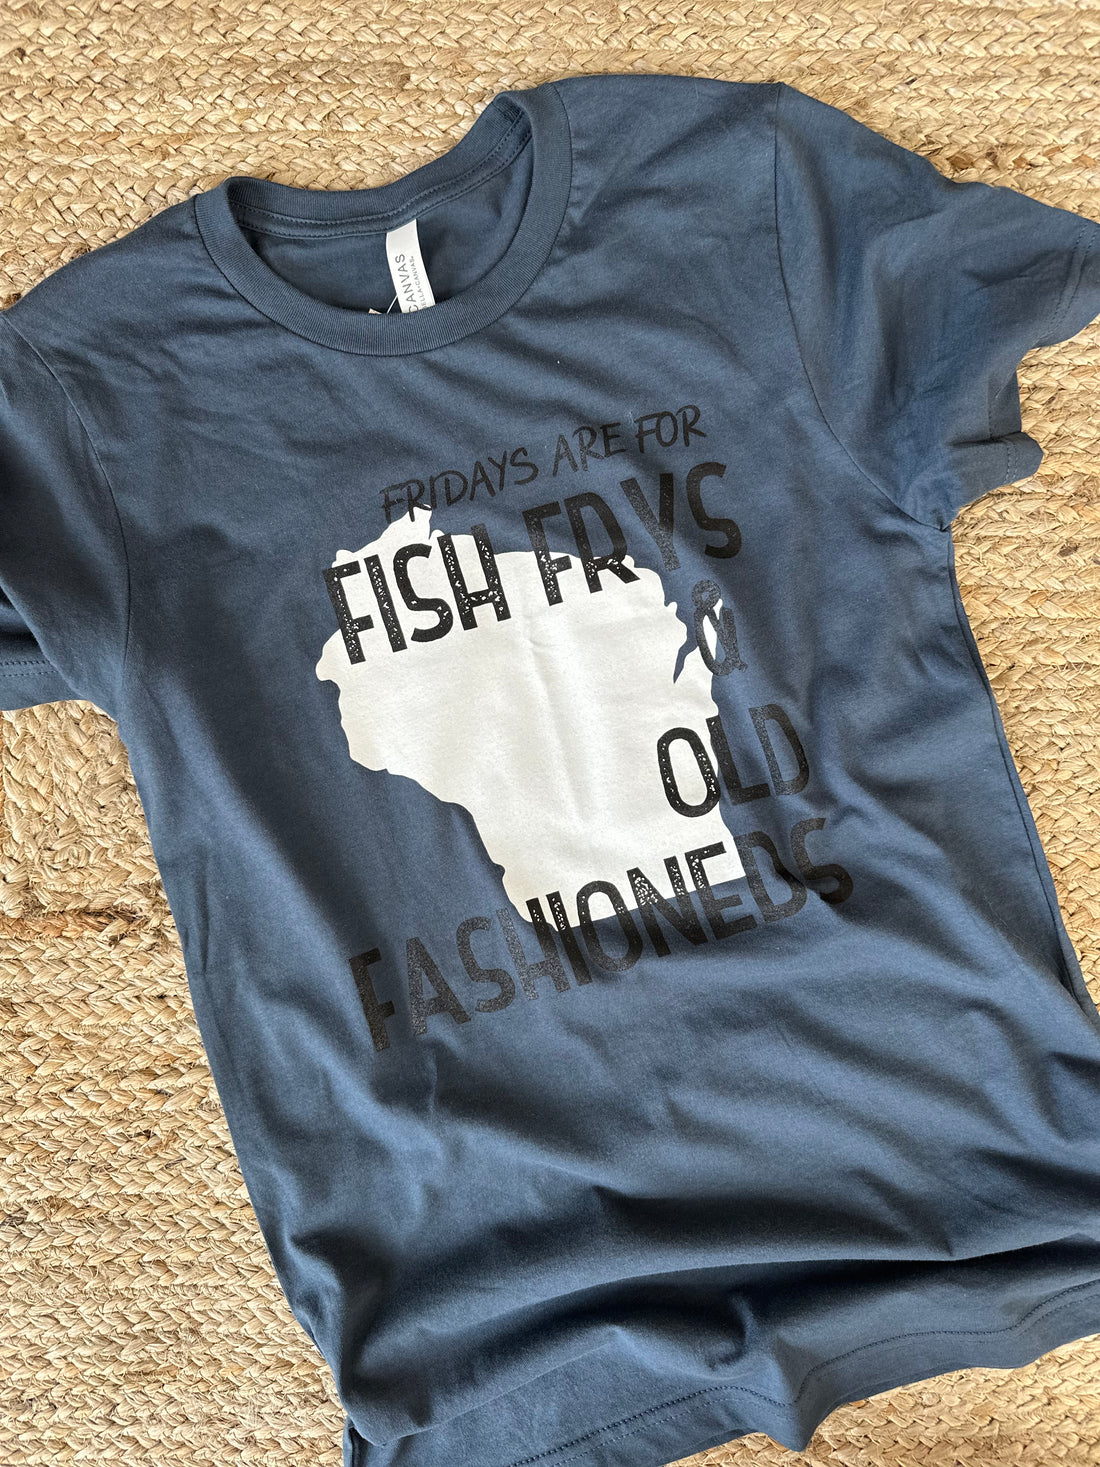 Fish Frys and Old Fashioneds Dark Blue Tee